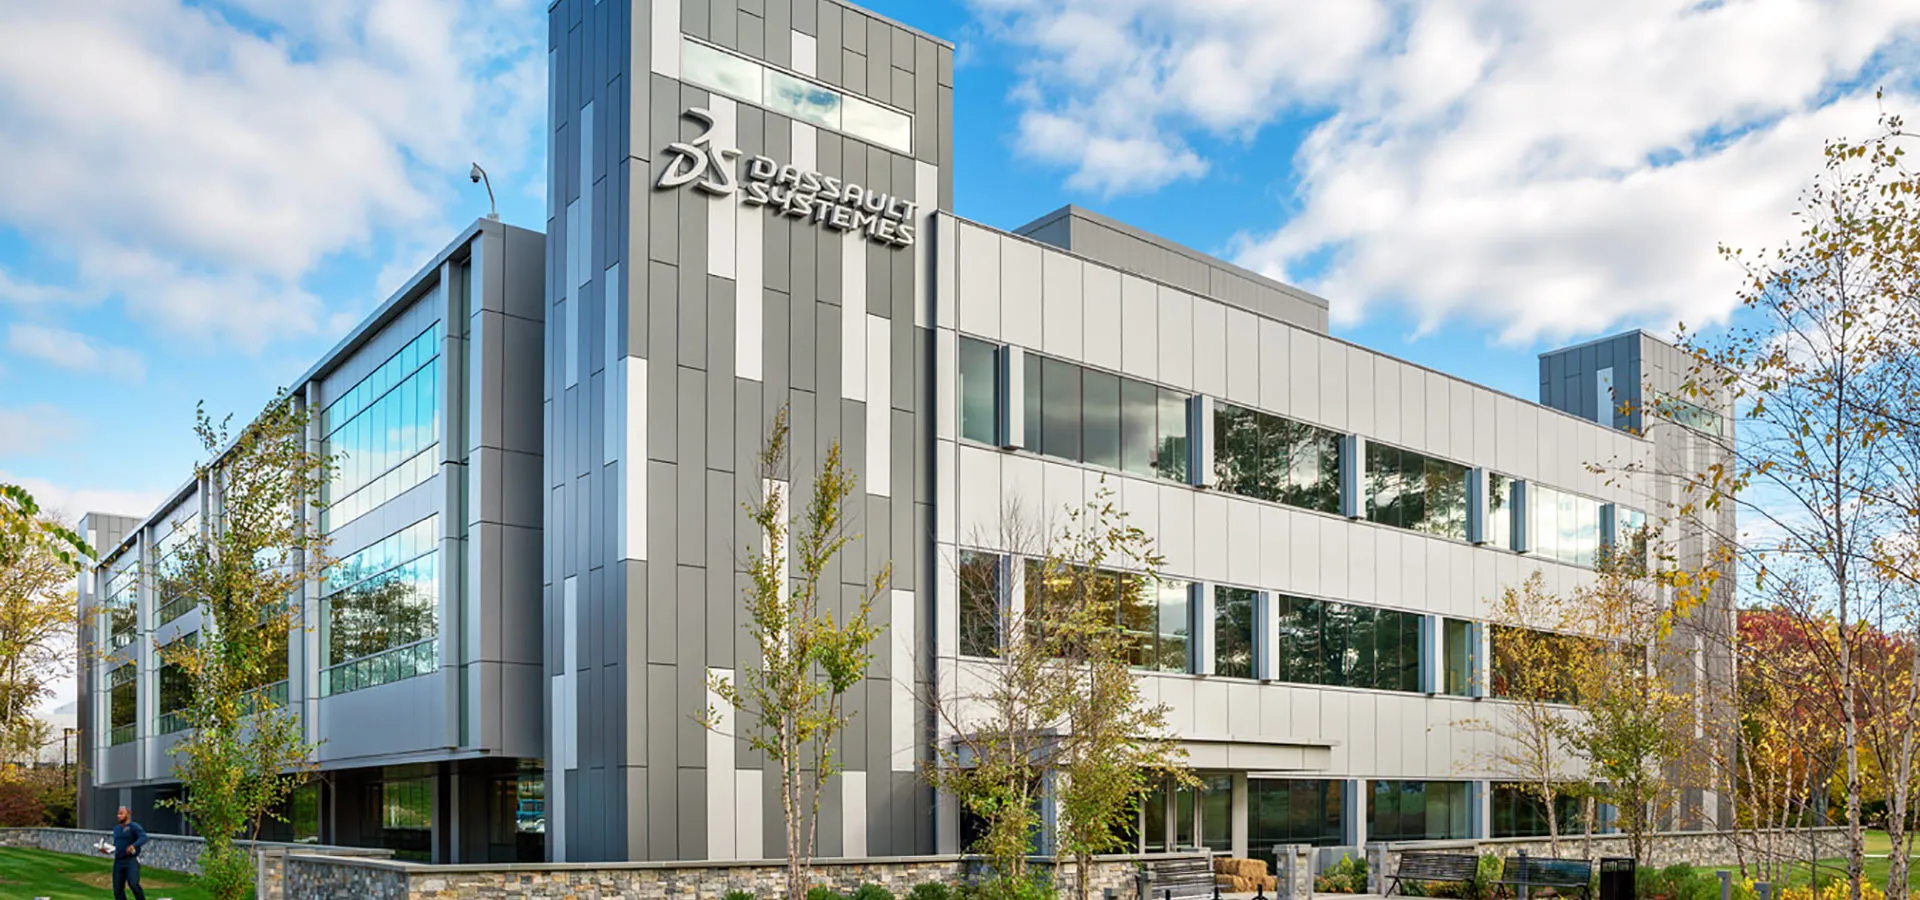 3DS Providence Campus > Dassault Systèmes